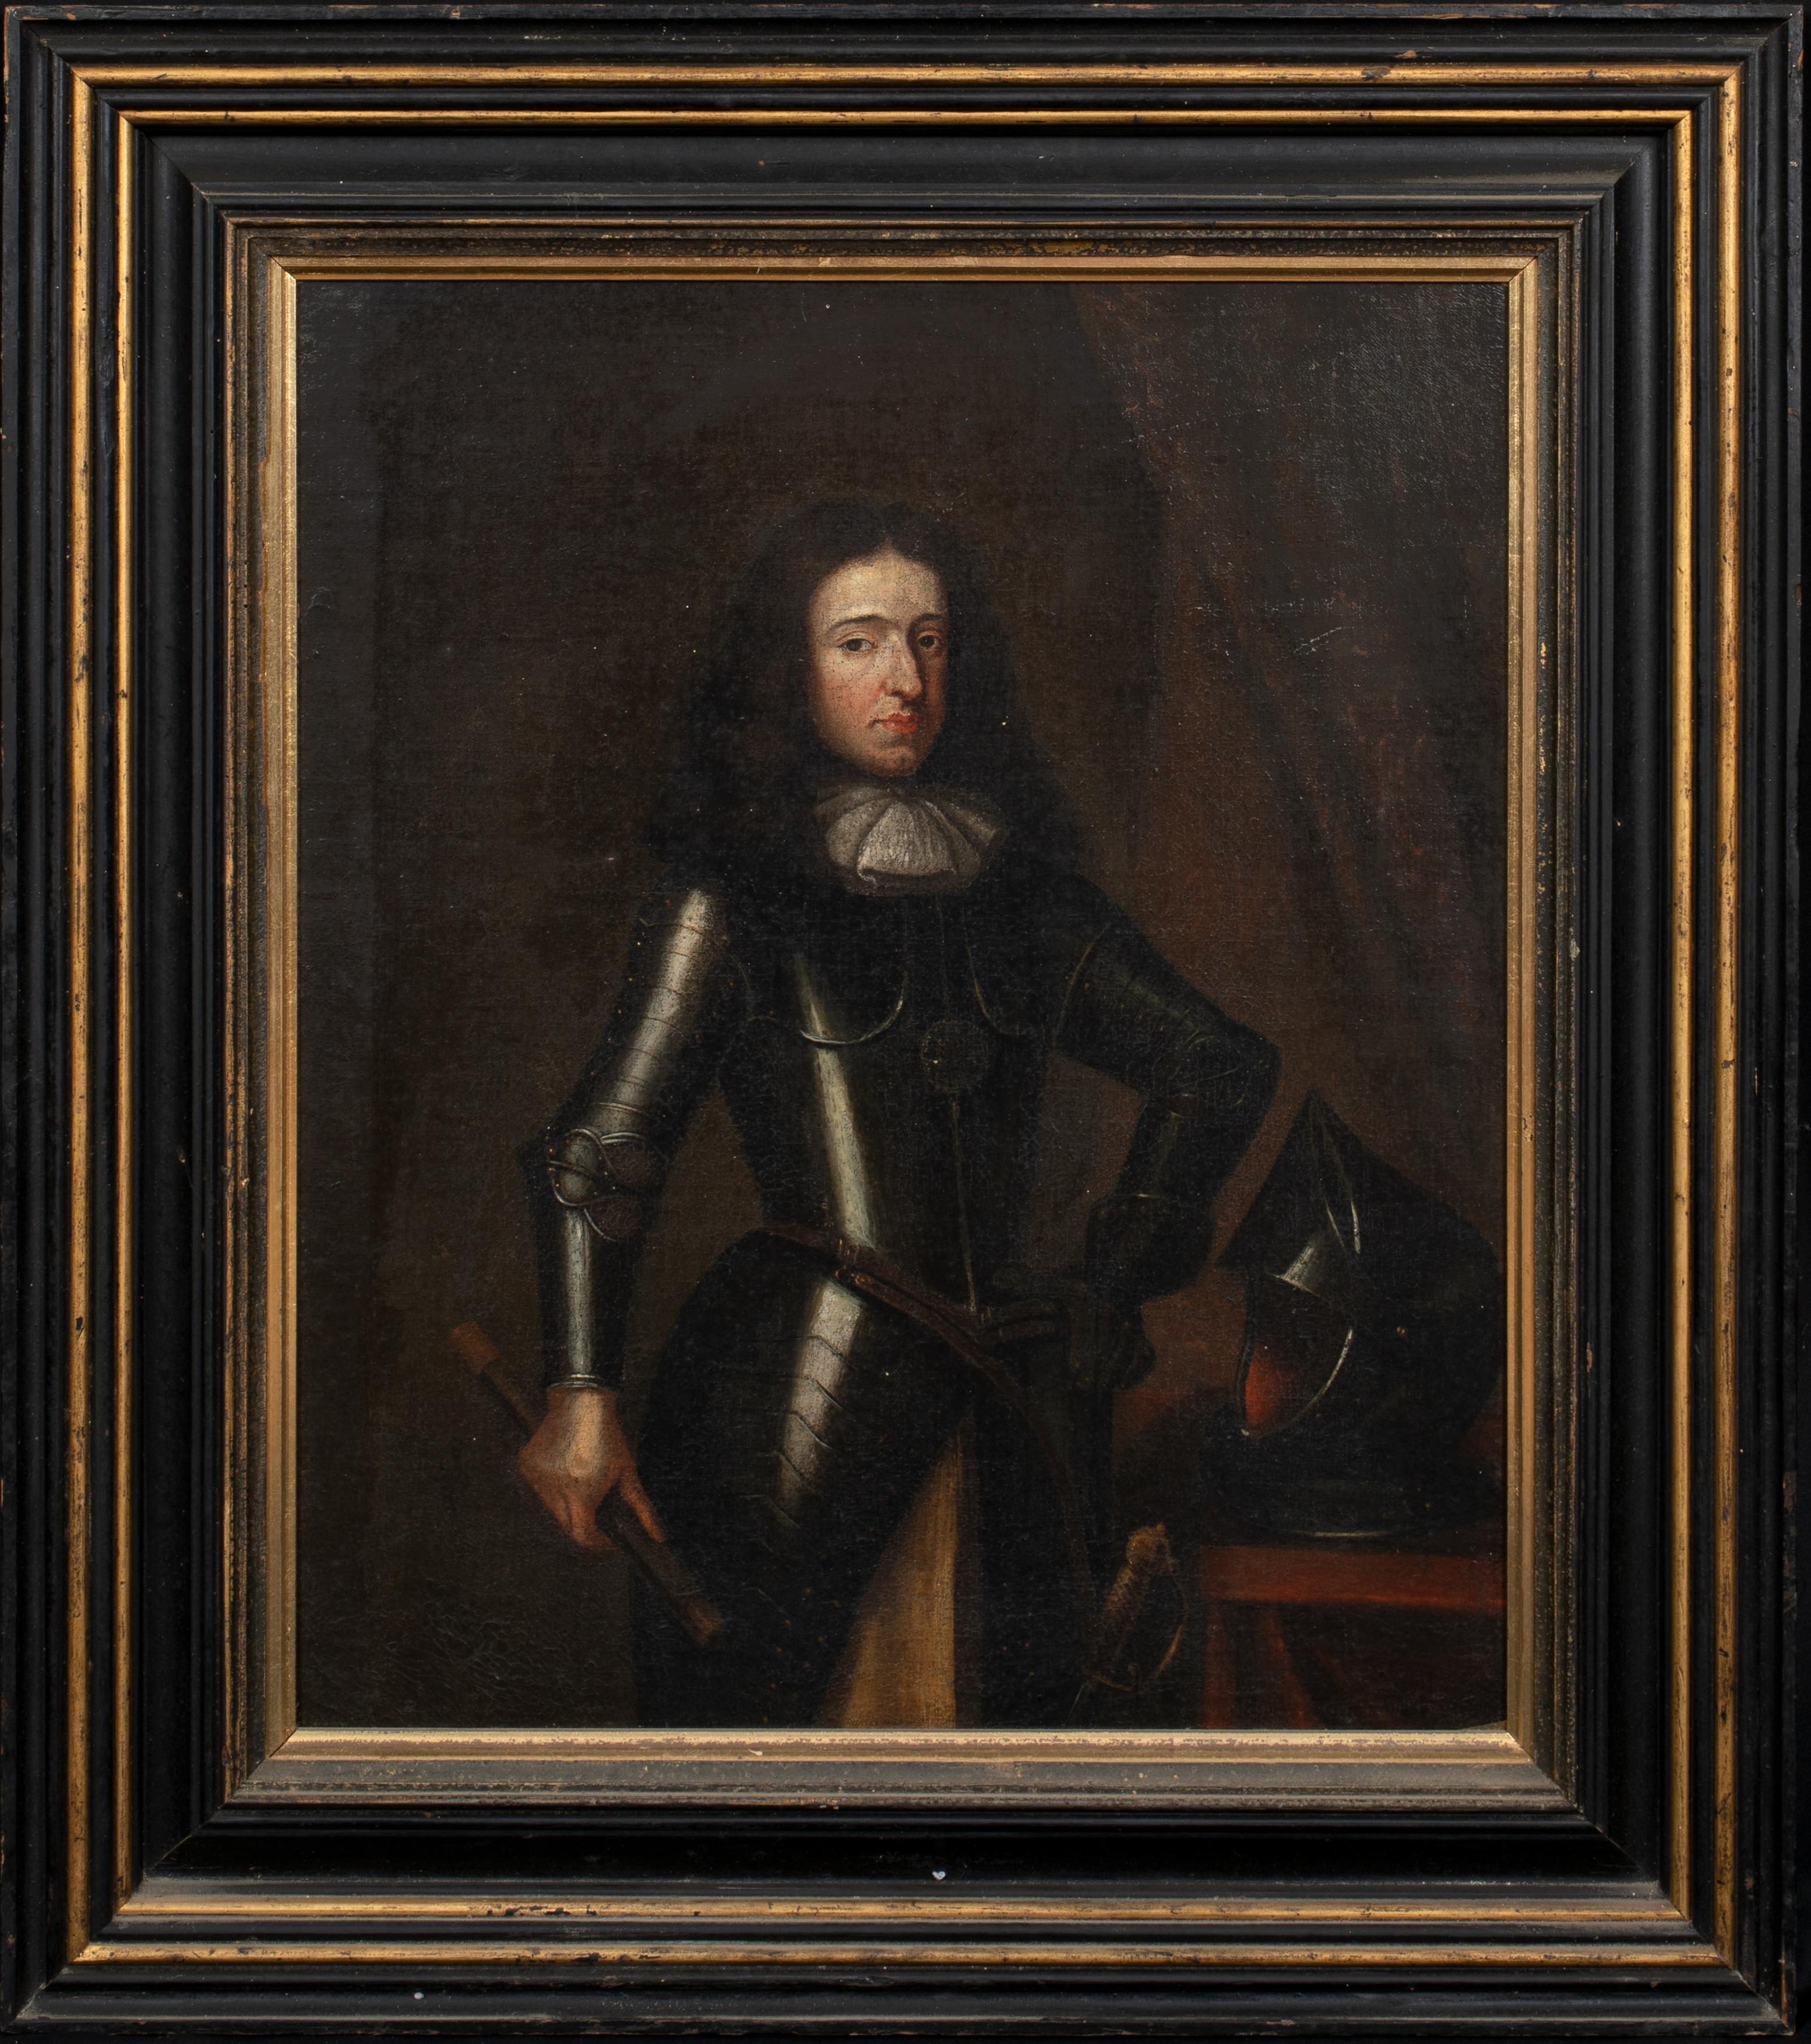 Sir Thomas Fairfax (1612-1670), 3rd Lord Fairfax of Cameron, 17th Century  - Painting by Unknown